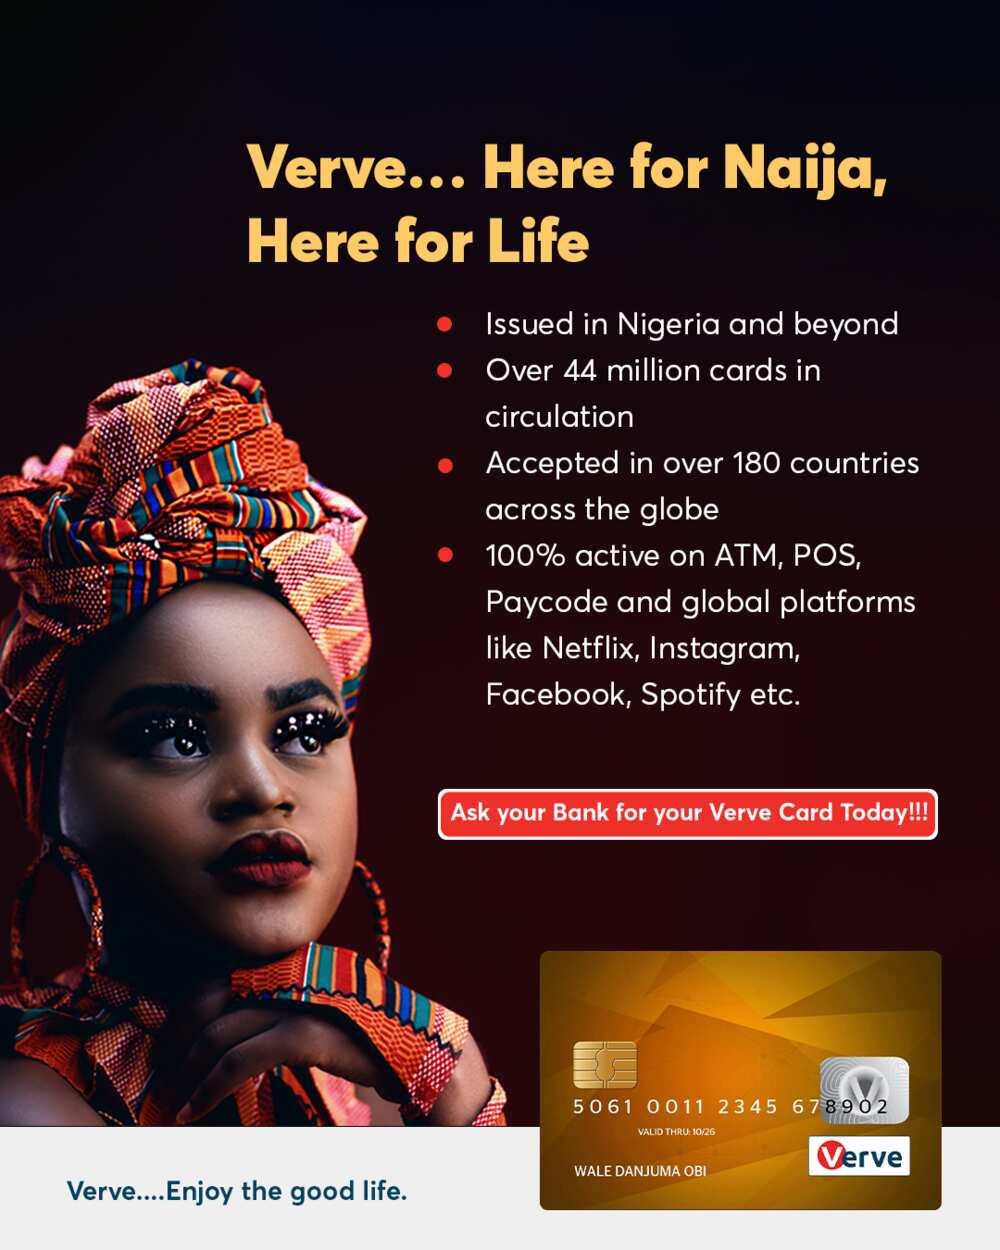 Africa’s First Domestic Card: Verve…Here for Naija, Here for Life